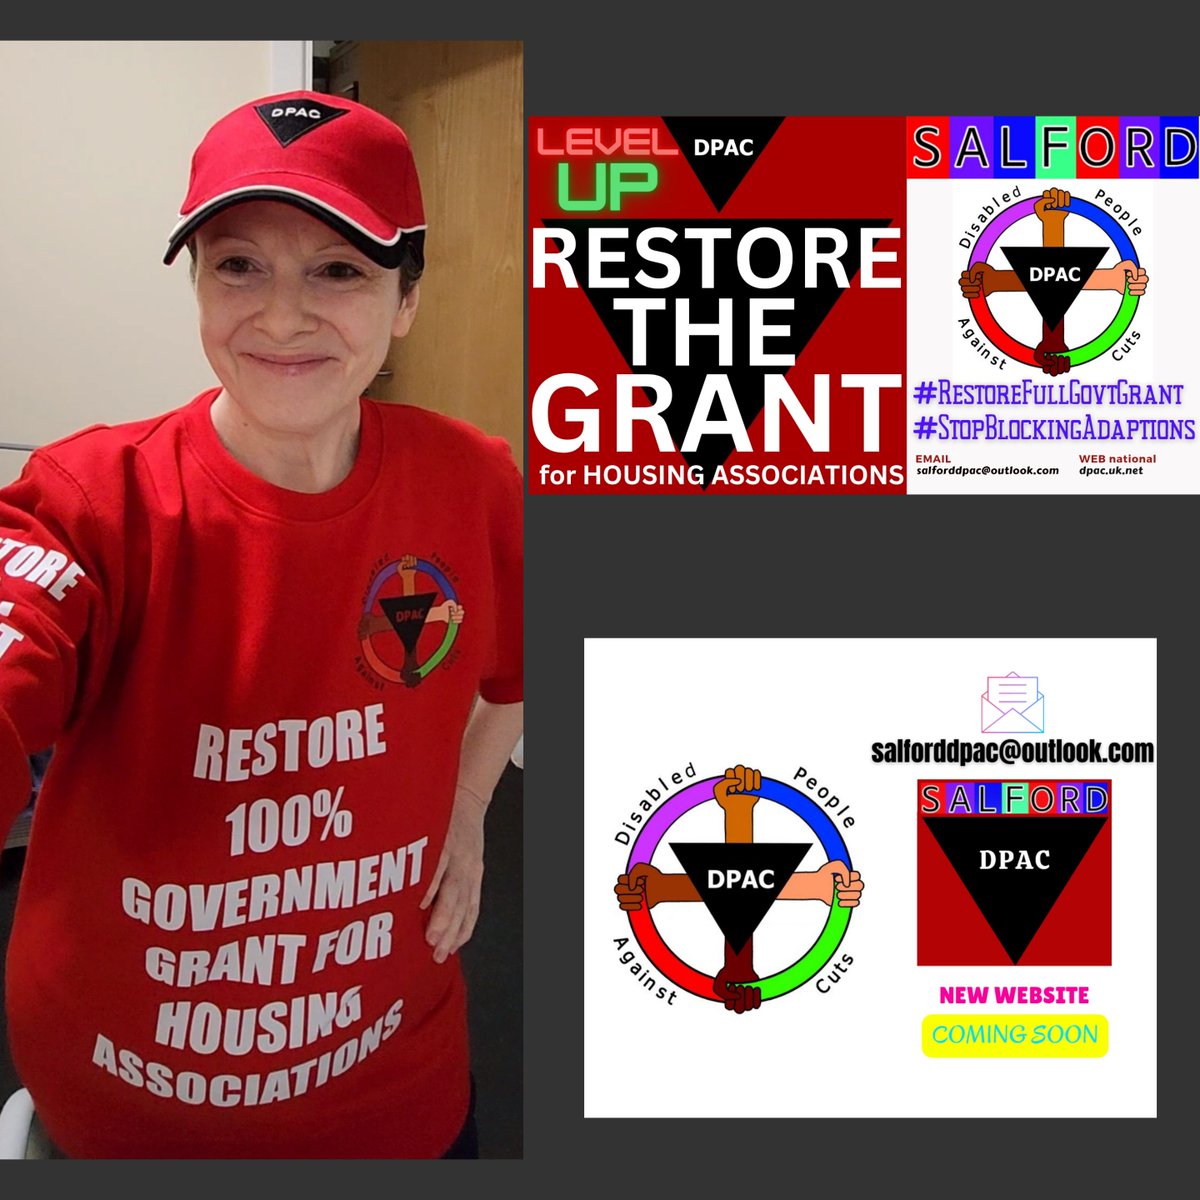 ‼️ The Grant is unstable now in various Housing Associations:
TOGETHER WE CAN MAKE THE CHANGE.
TAKE ACTION NOW TO RESTORE THE GRANT‼️🥹
🔥 ADD YOUR NAME TO THE PETITION TO: #RestoreFullGovtGrant🔥
#StopBlockingAdaptions 
👇👇👇👇👇👇👇👇👇👇👇👇
chng.it/C8dJ4mwJs6